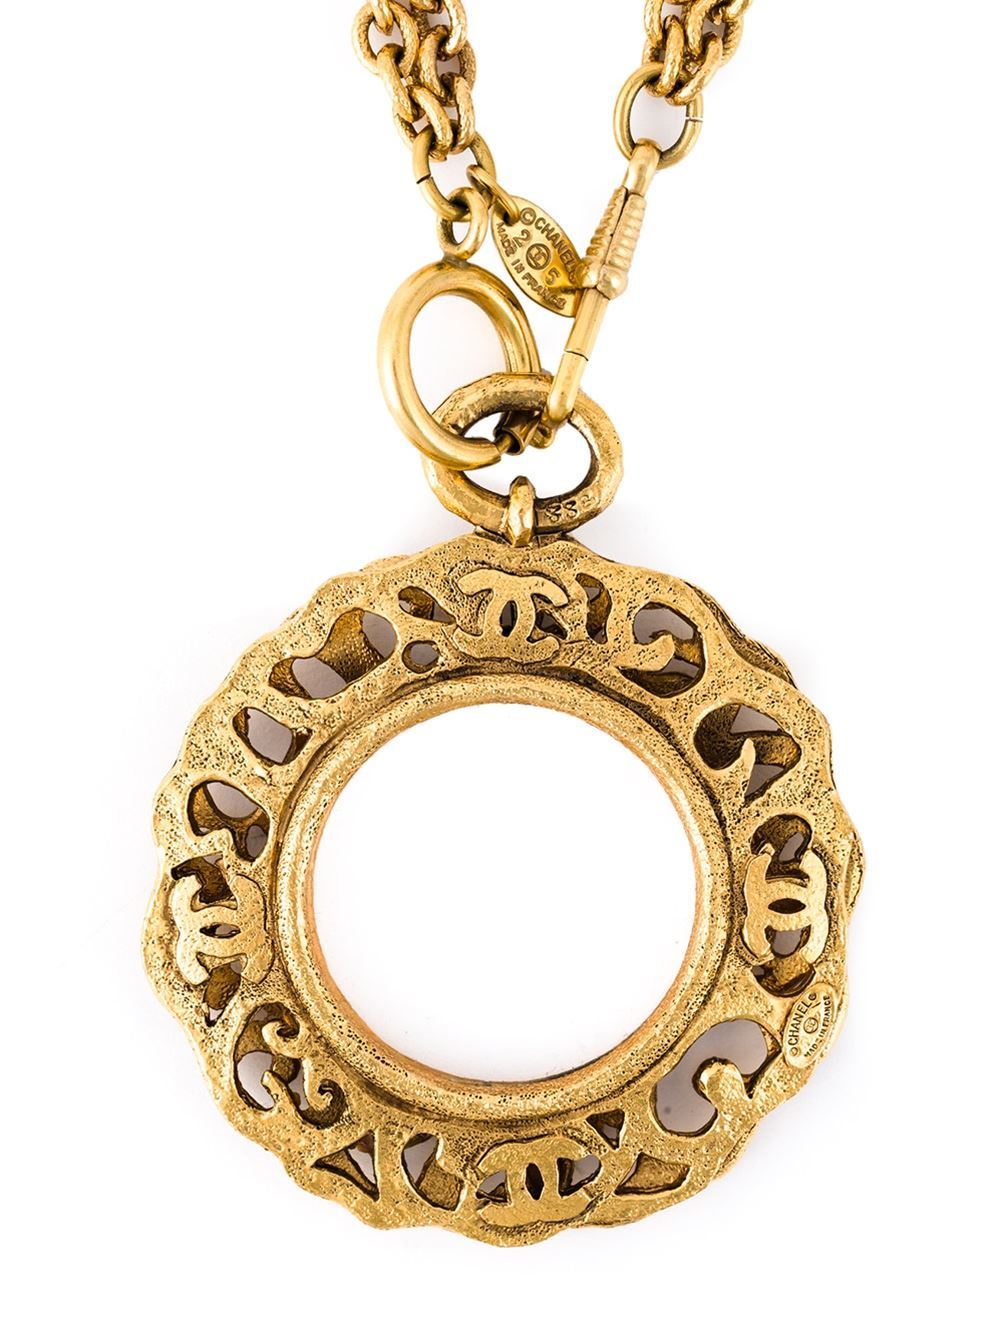 This gold-tone metal cut-out pendant necklace from Chanel features a rolo chain, a spring-ring fastening, a hook clip fastening and a gold-tone logo plaque.

Colour: Gold

Material: Metal

Measurements: length: 45 centimetres, pendant length: